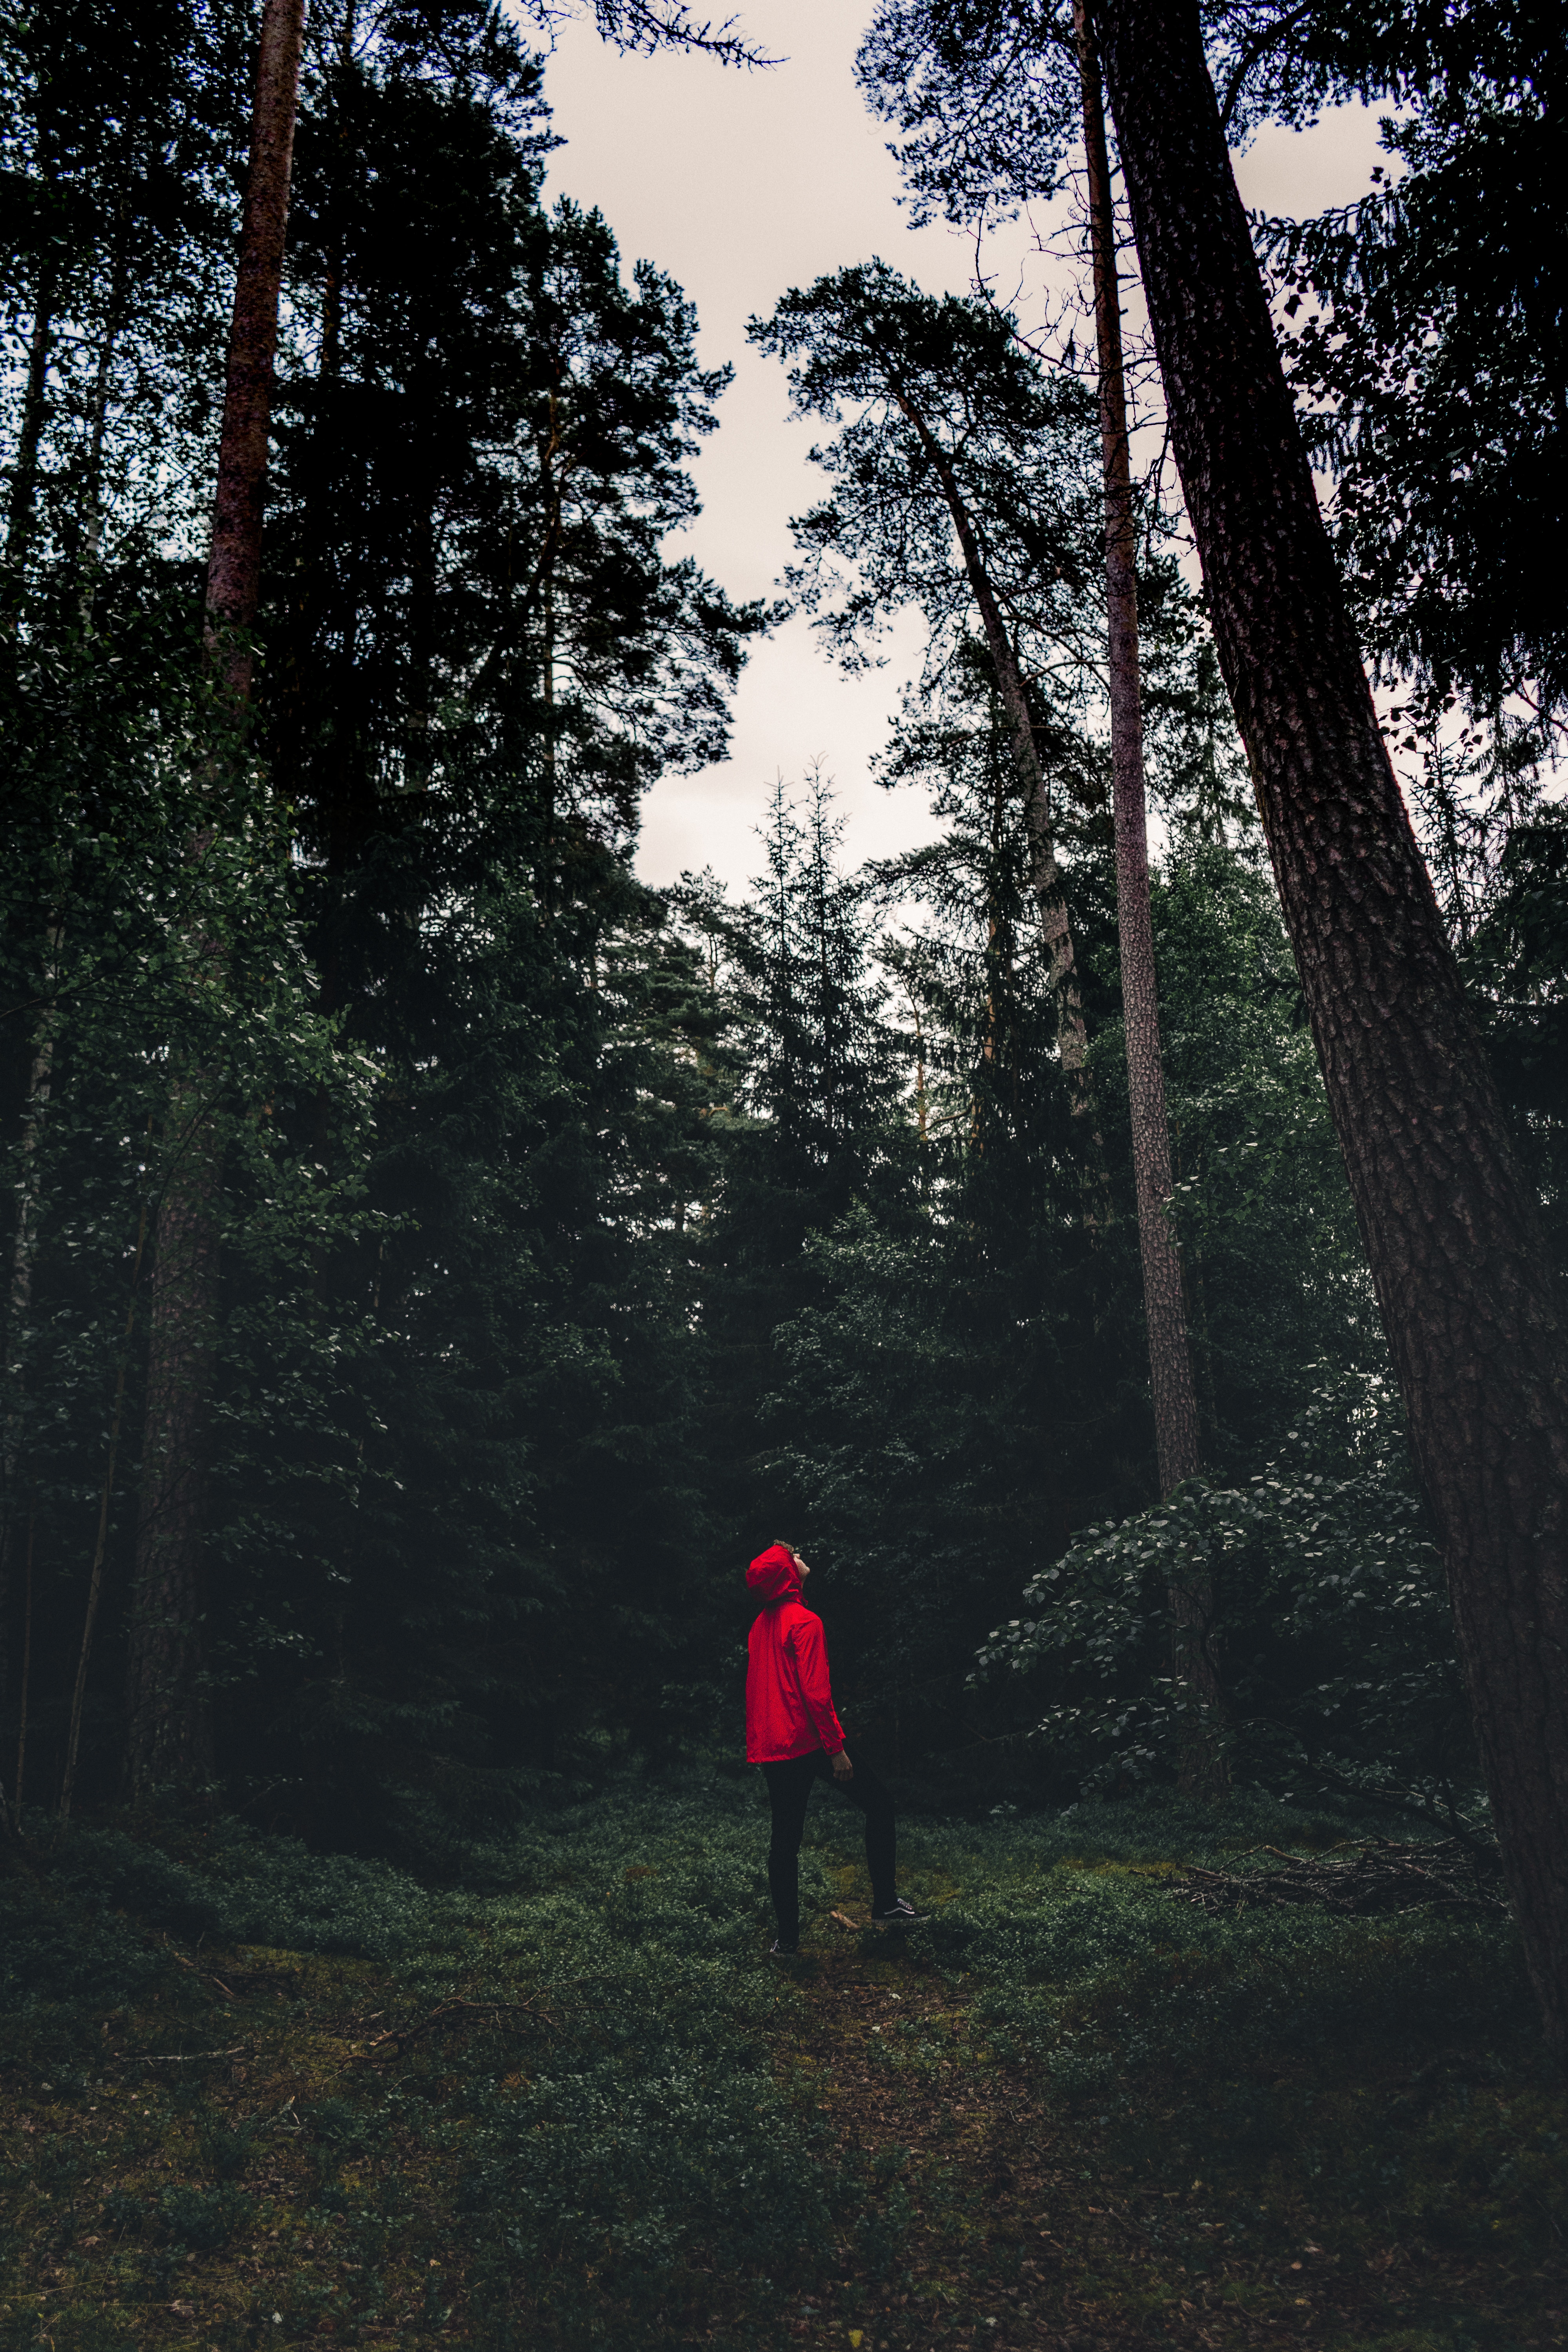 person, nature, trees, privacy, seclusion, forest, human, loneliness, sweden